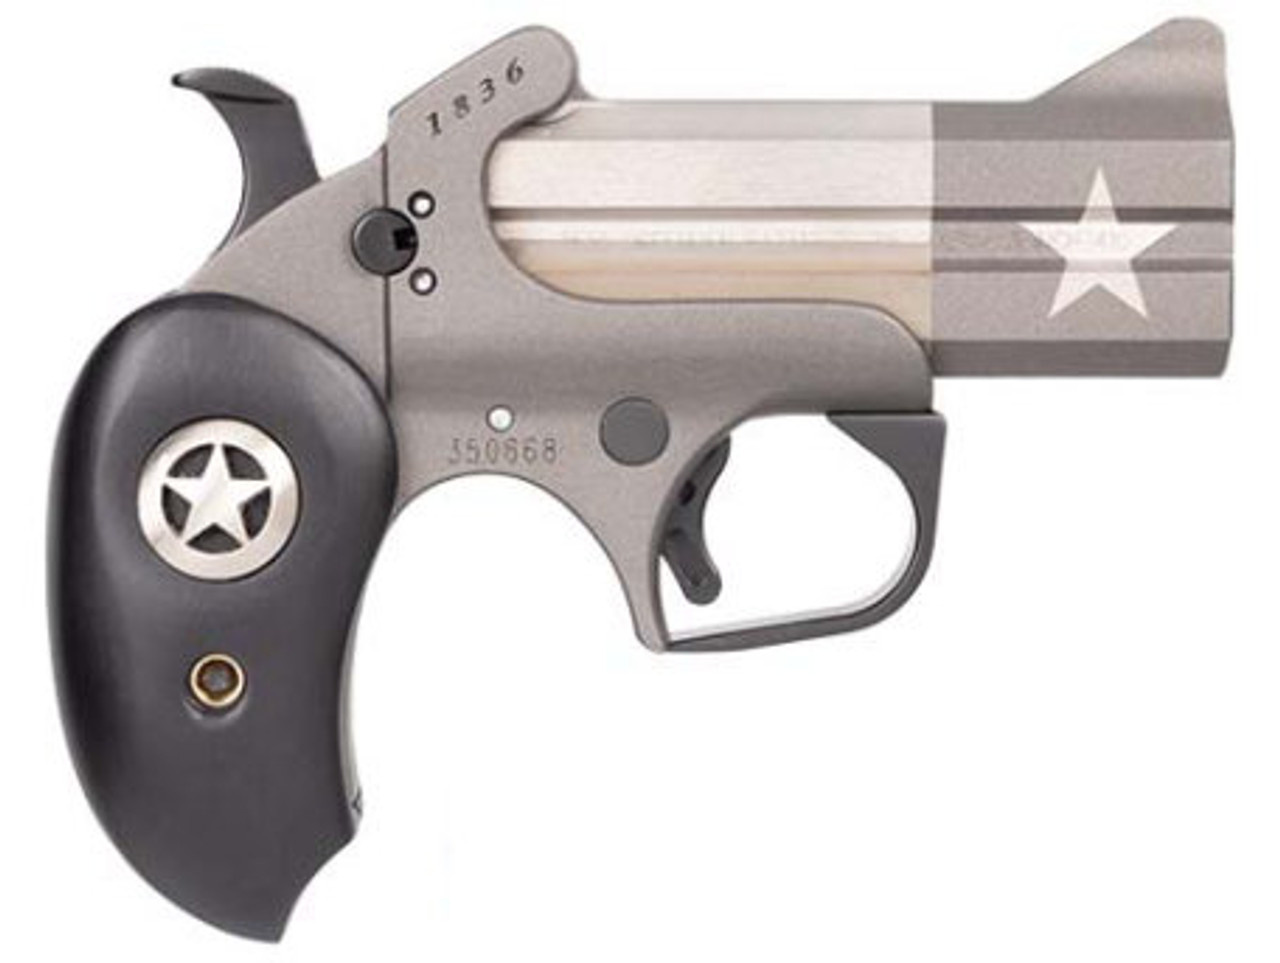 Bond Arms Bond Arms, 1836 Texas Independence, 45 Colt, 5.50", 2rd RD, Gray & Olive W/ Star, Black Ash Grips W/ Star Inlay